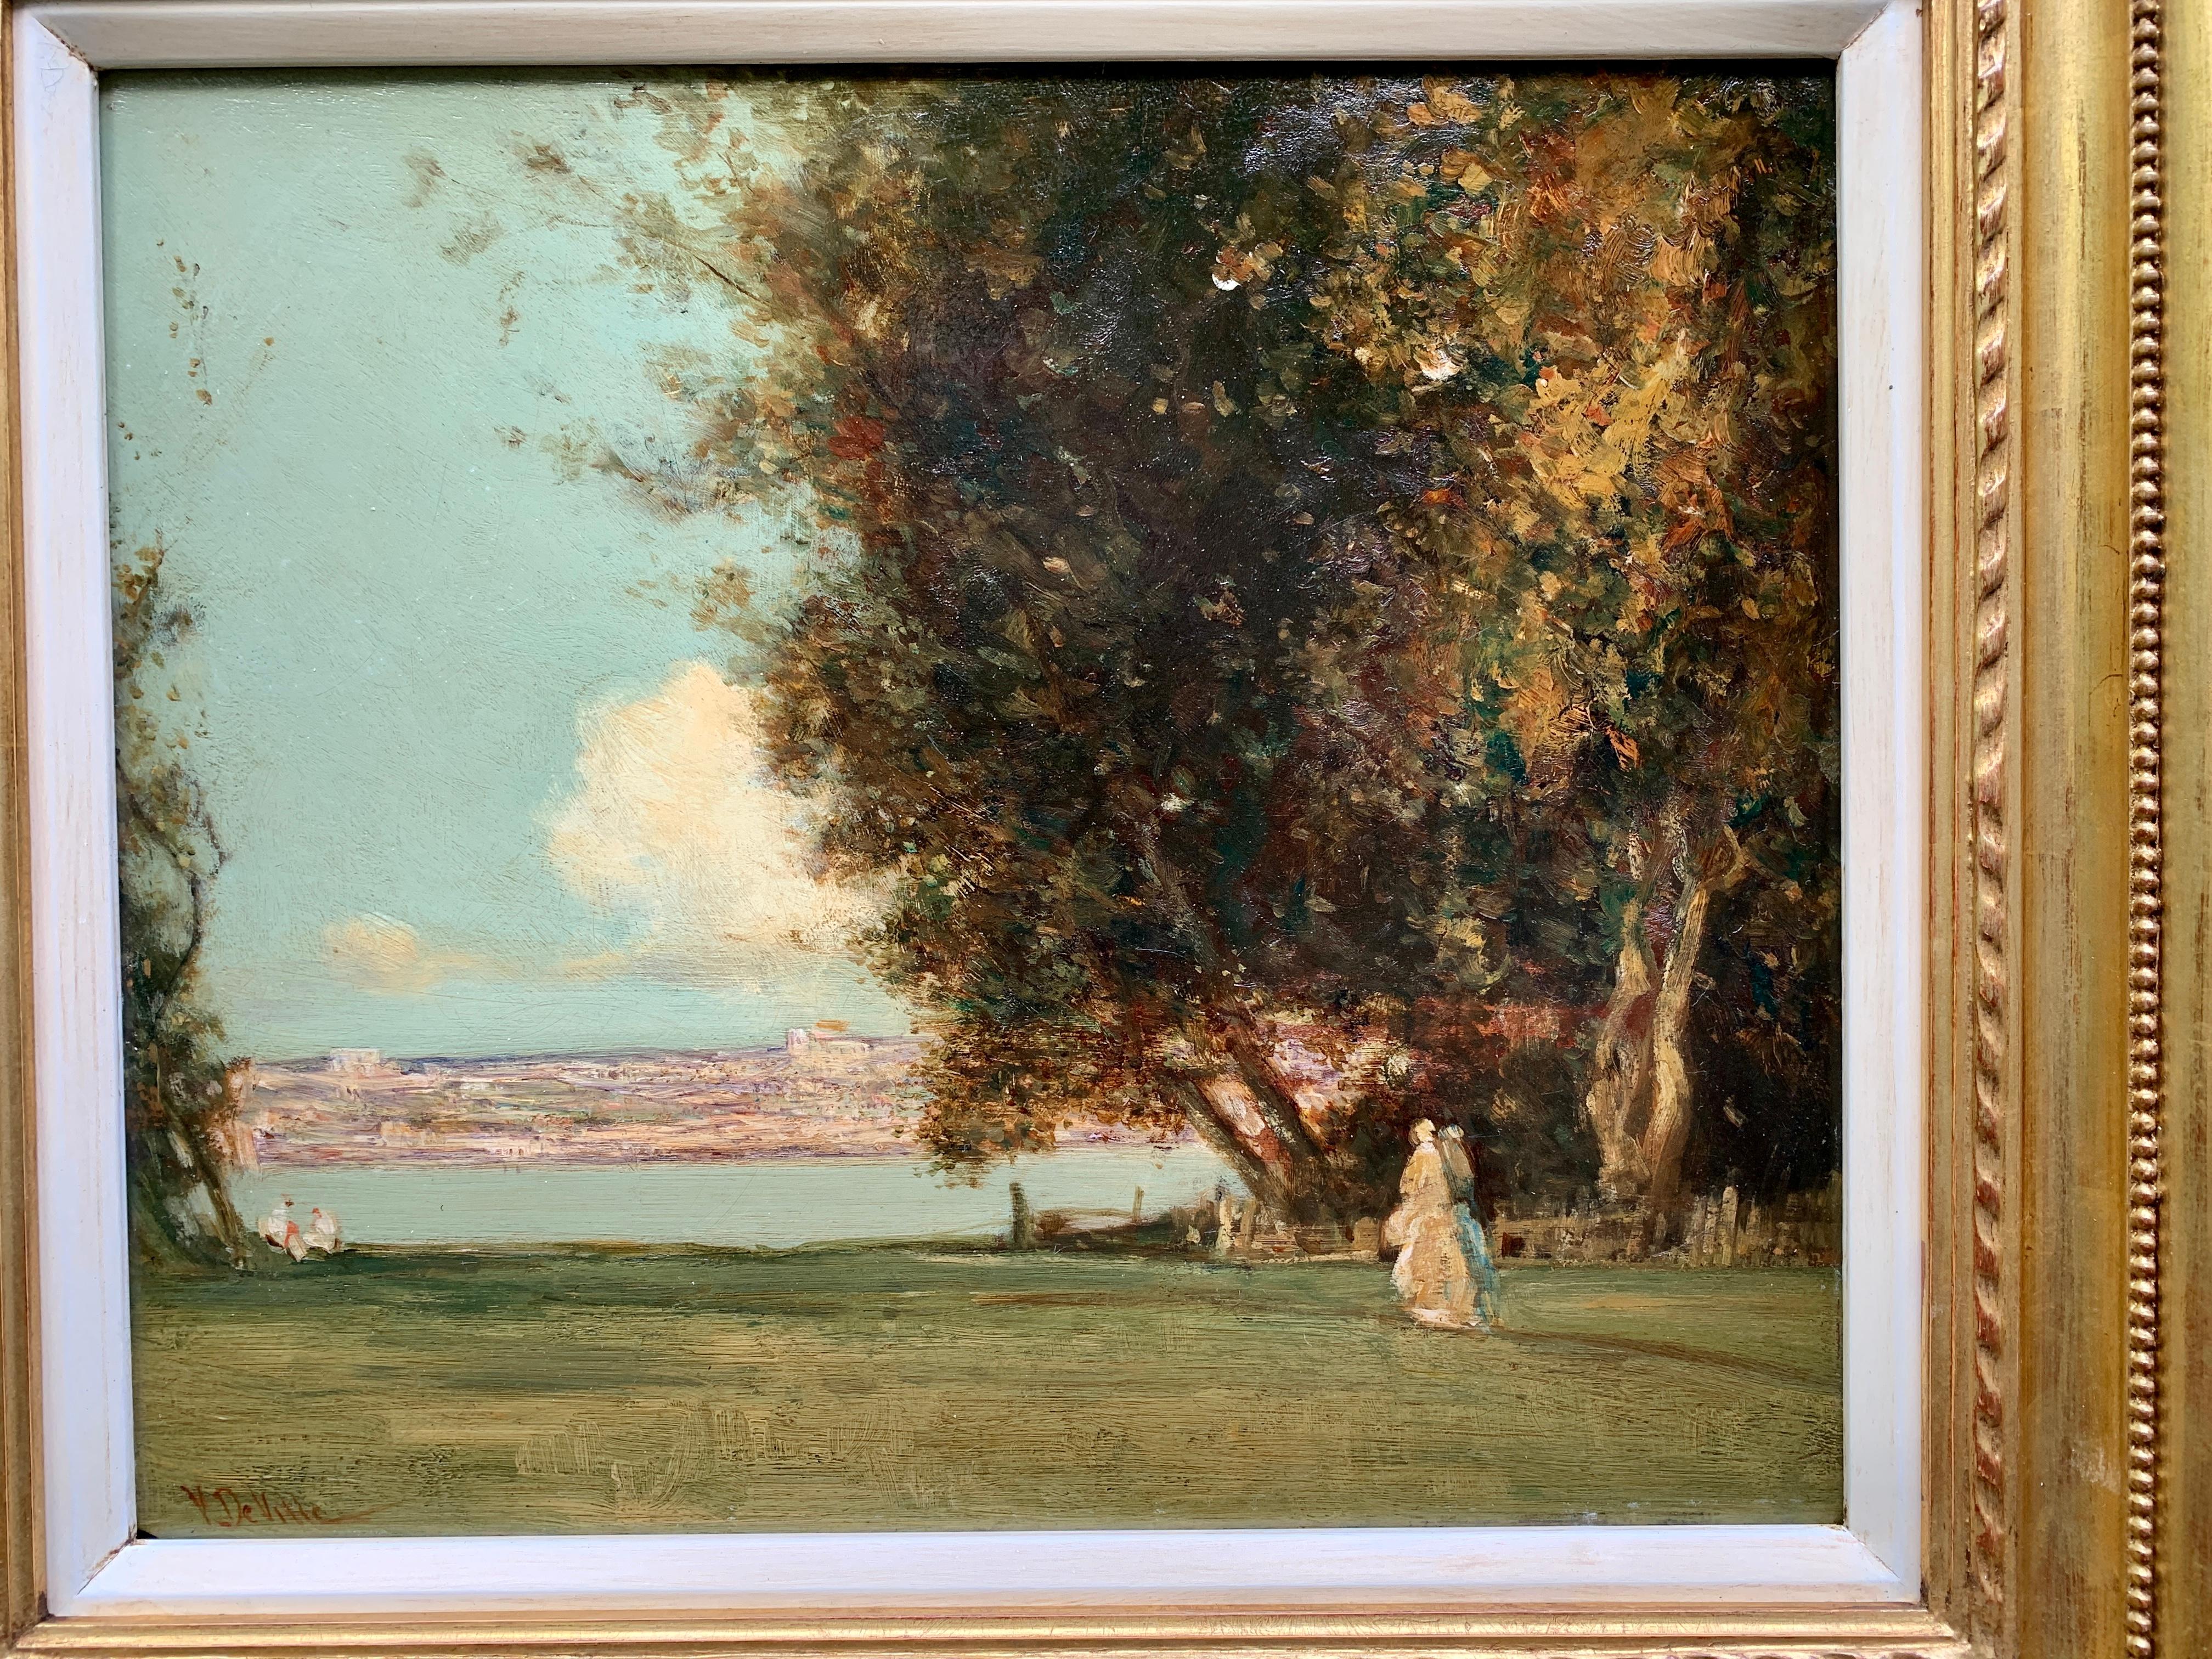 Antique 19th century English Impressionist classical landscape with figures  - Painting by Joseph Vickers De Ville